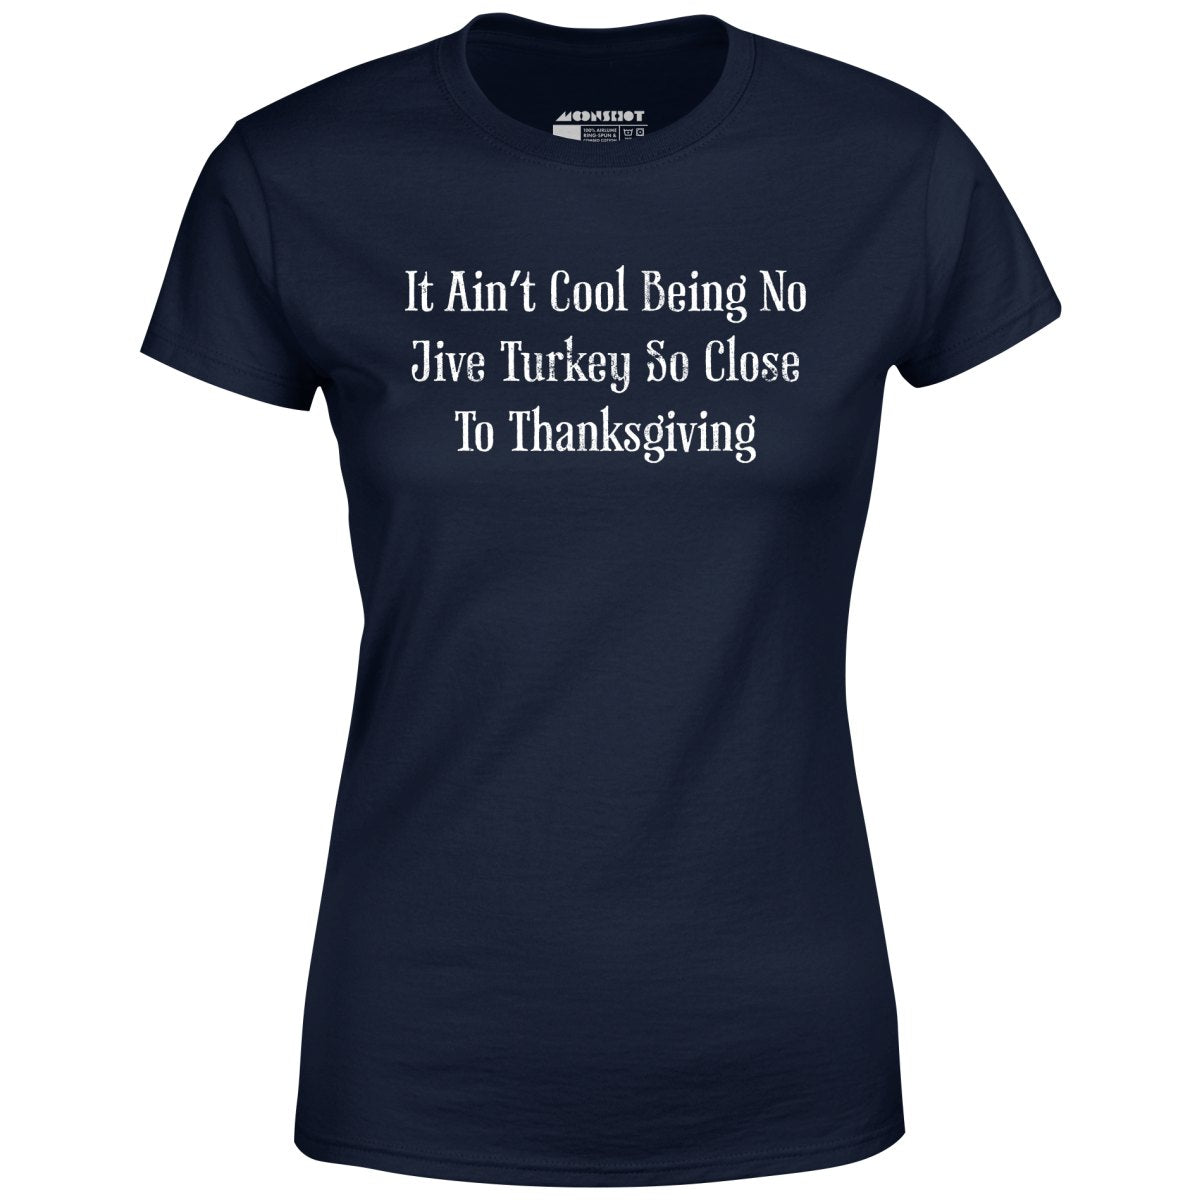 It Ain't Cool Being No Jive Turkey So Close to Thanksgiving - Women's T-Shirt